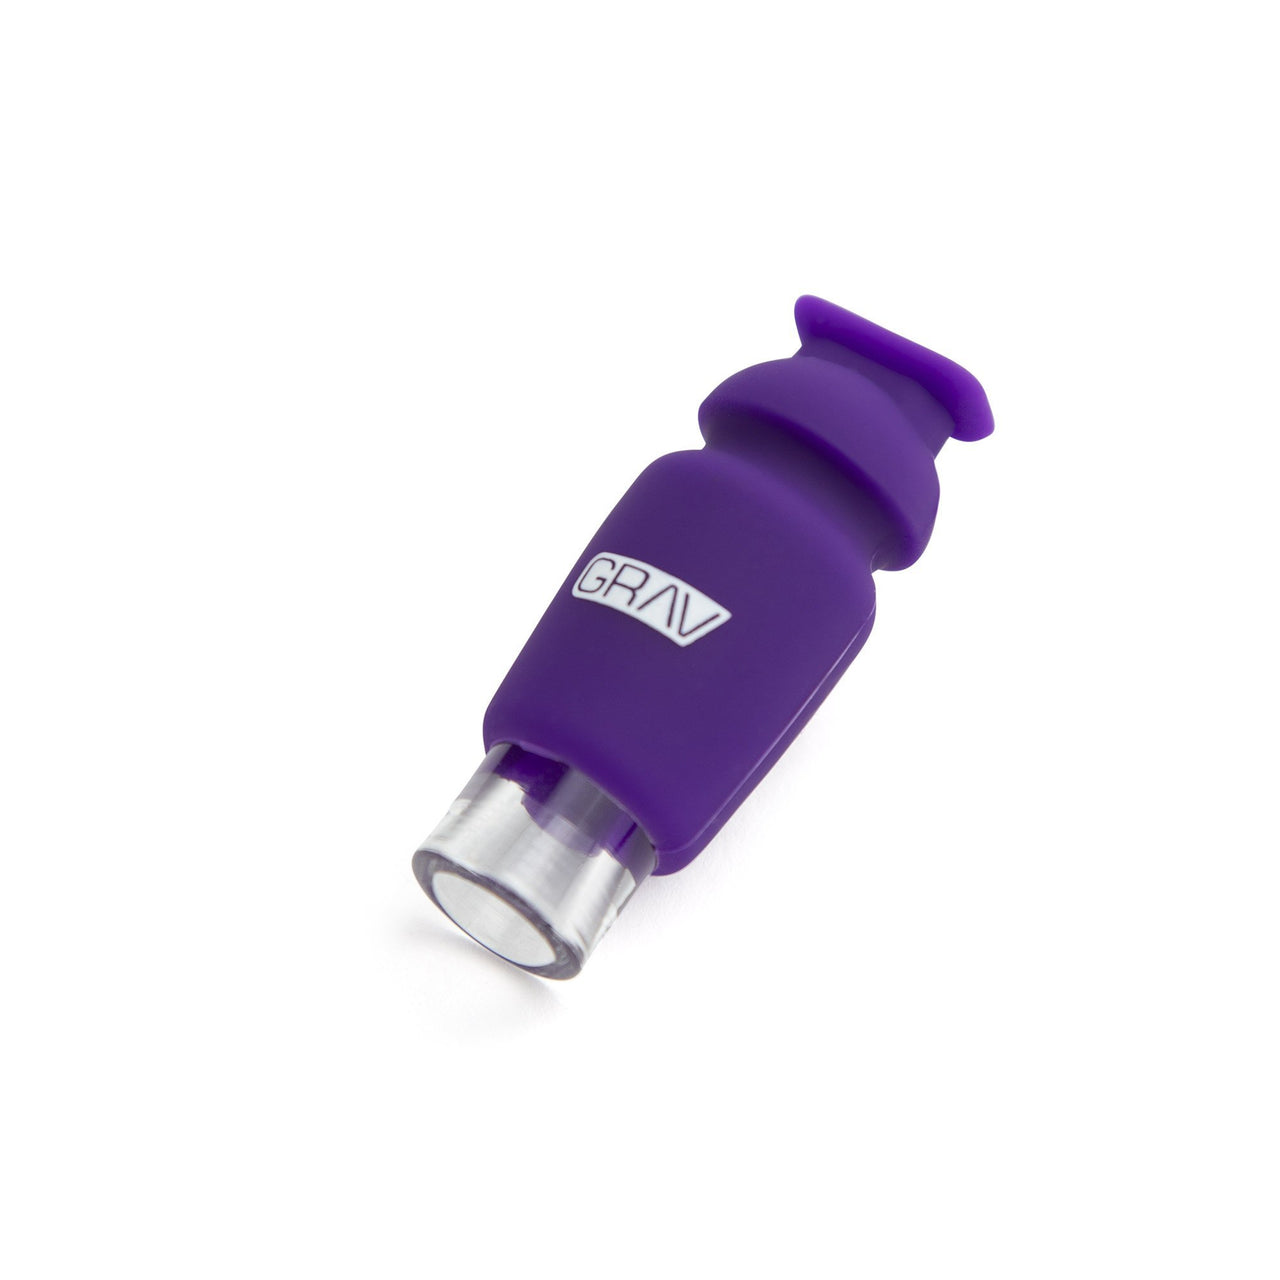 GRAV 1.5in Glass Filter Tip / Bowl / Taster w/Silicone Cap - 420 Science - The most trusted online smoke shop.